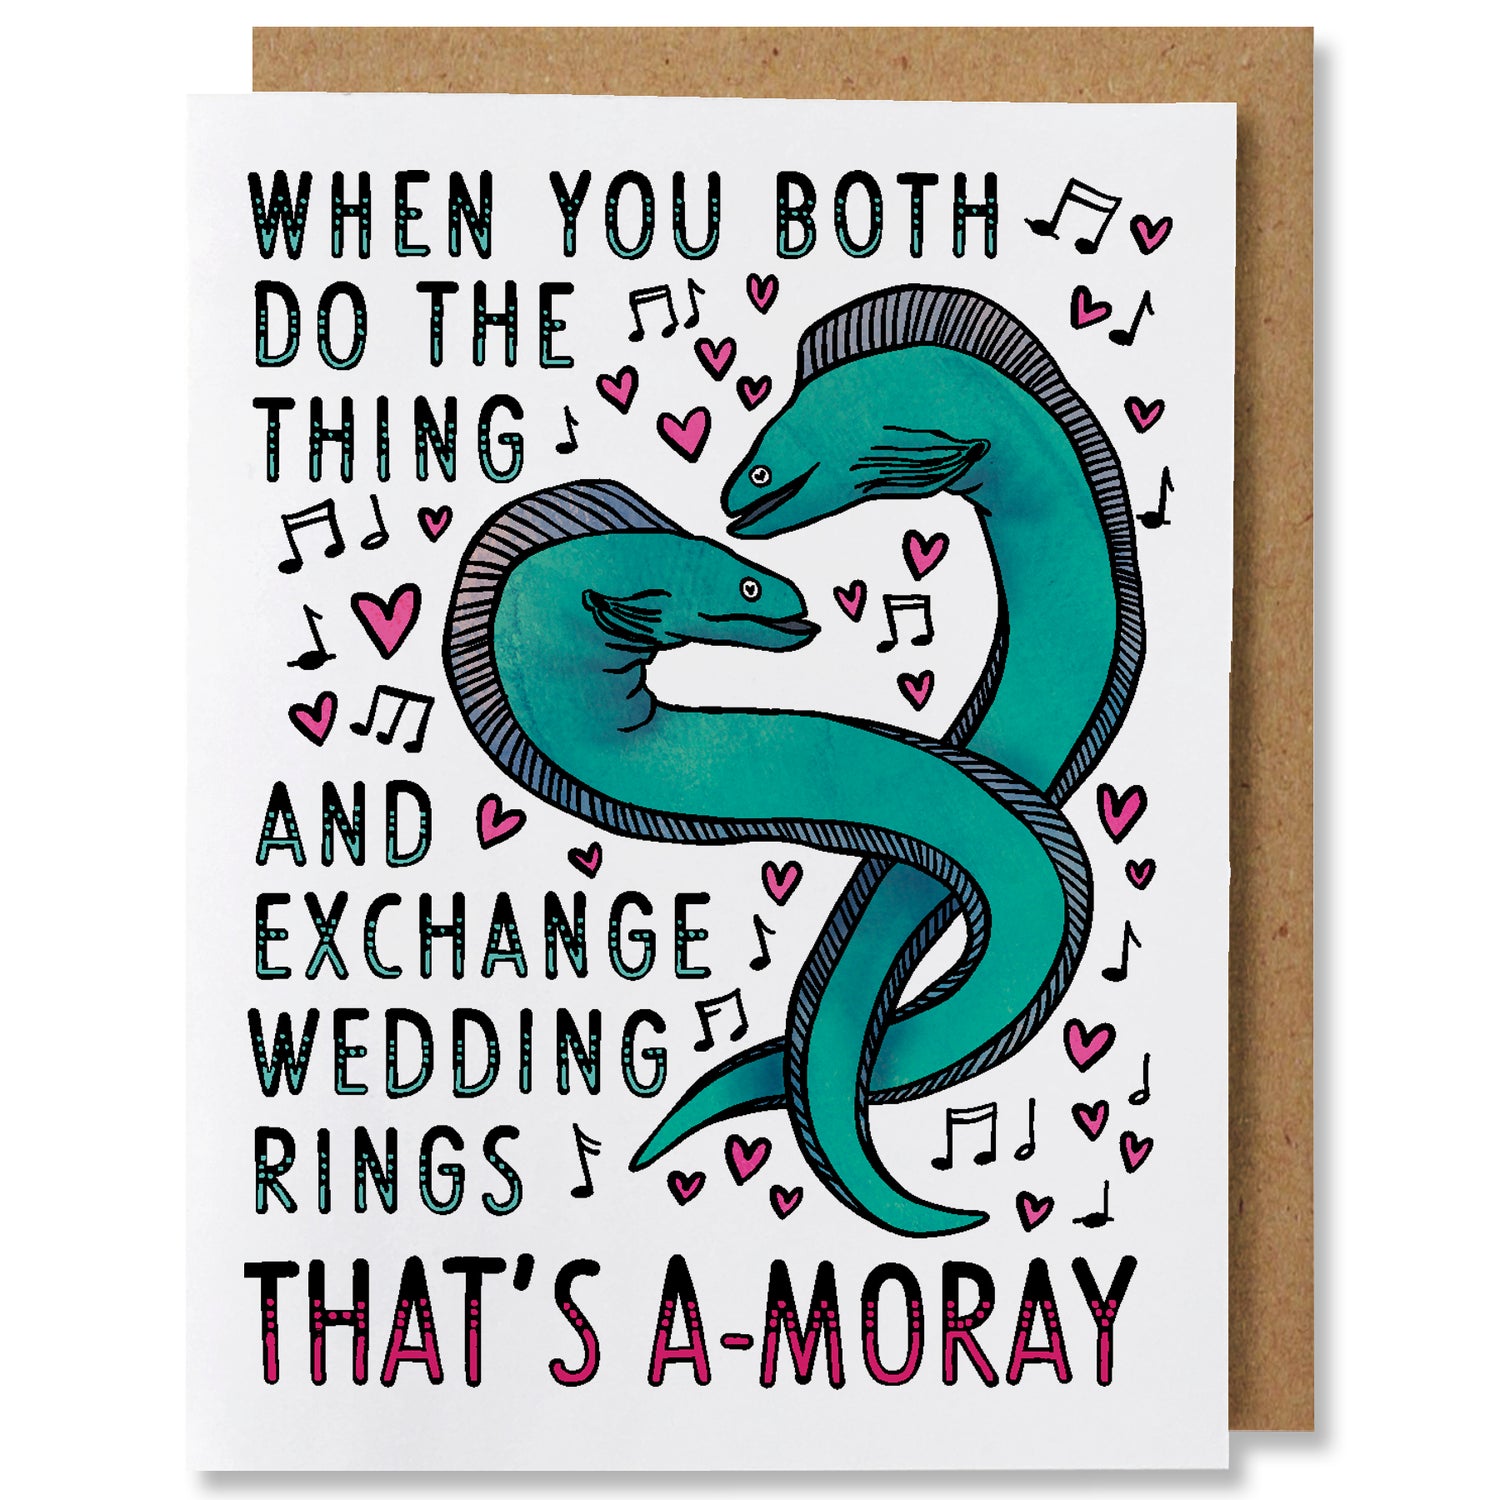 An illustrated greeting card featuring two green eels intertwined in the shape of a heart with music notes and hearts surrounding them with the caption "when you both do the thing and exchange wedding rings that's a-moray"